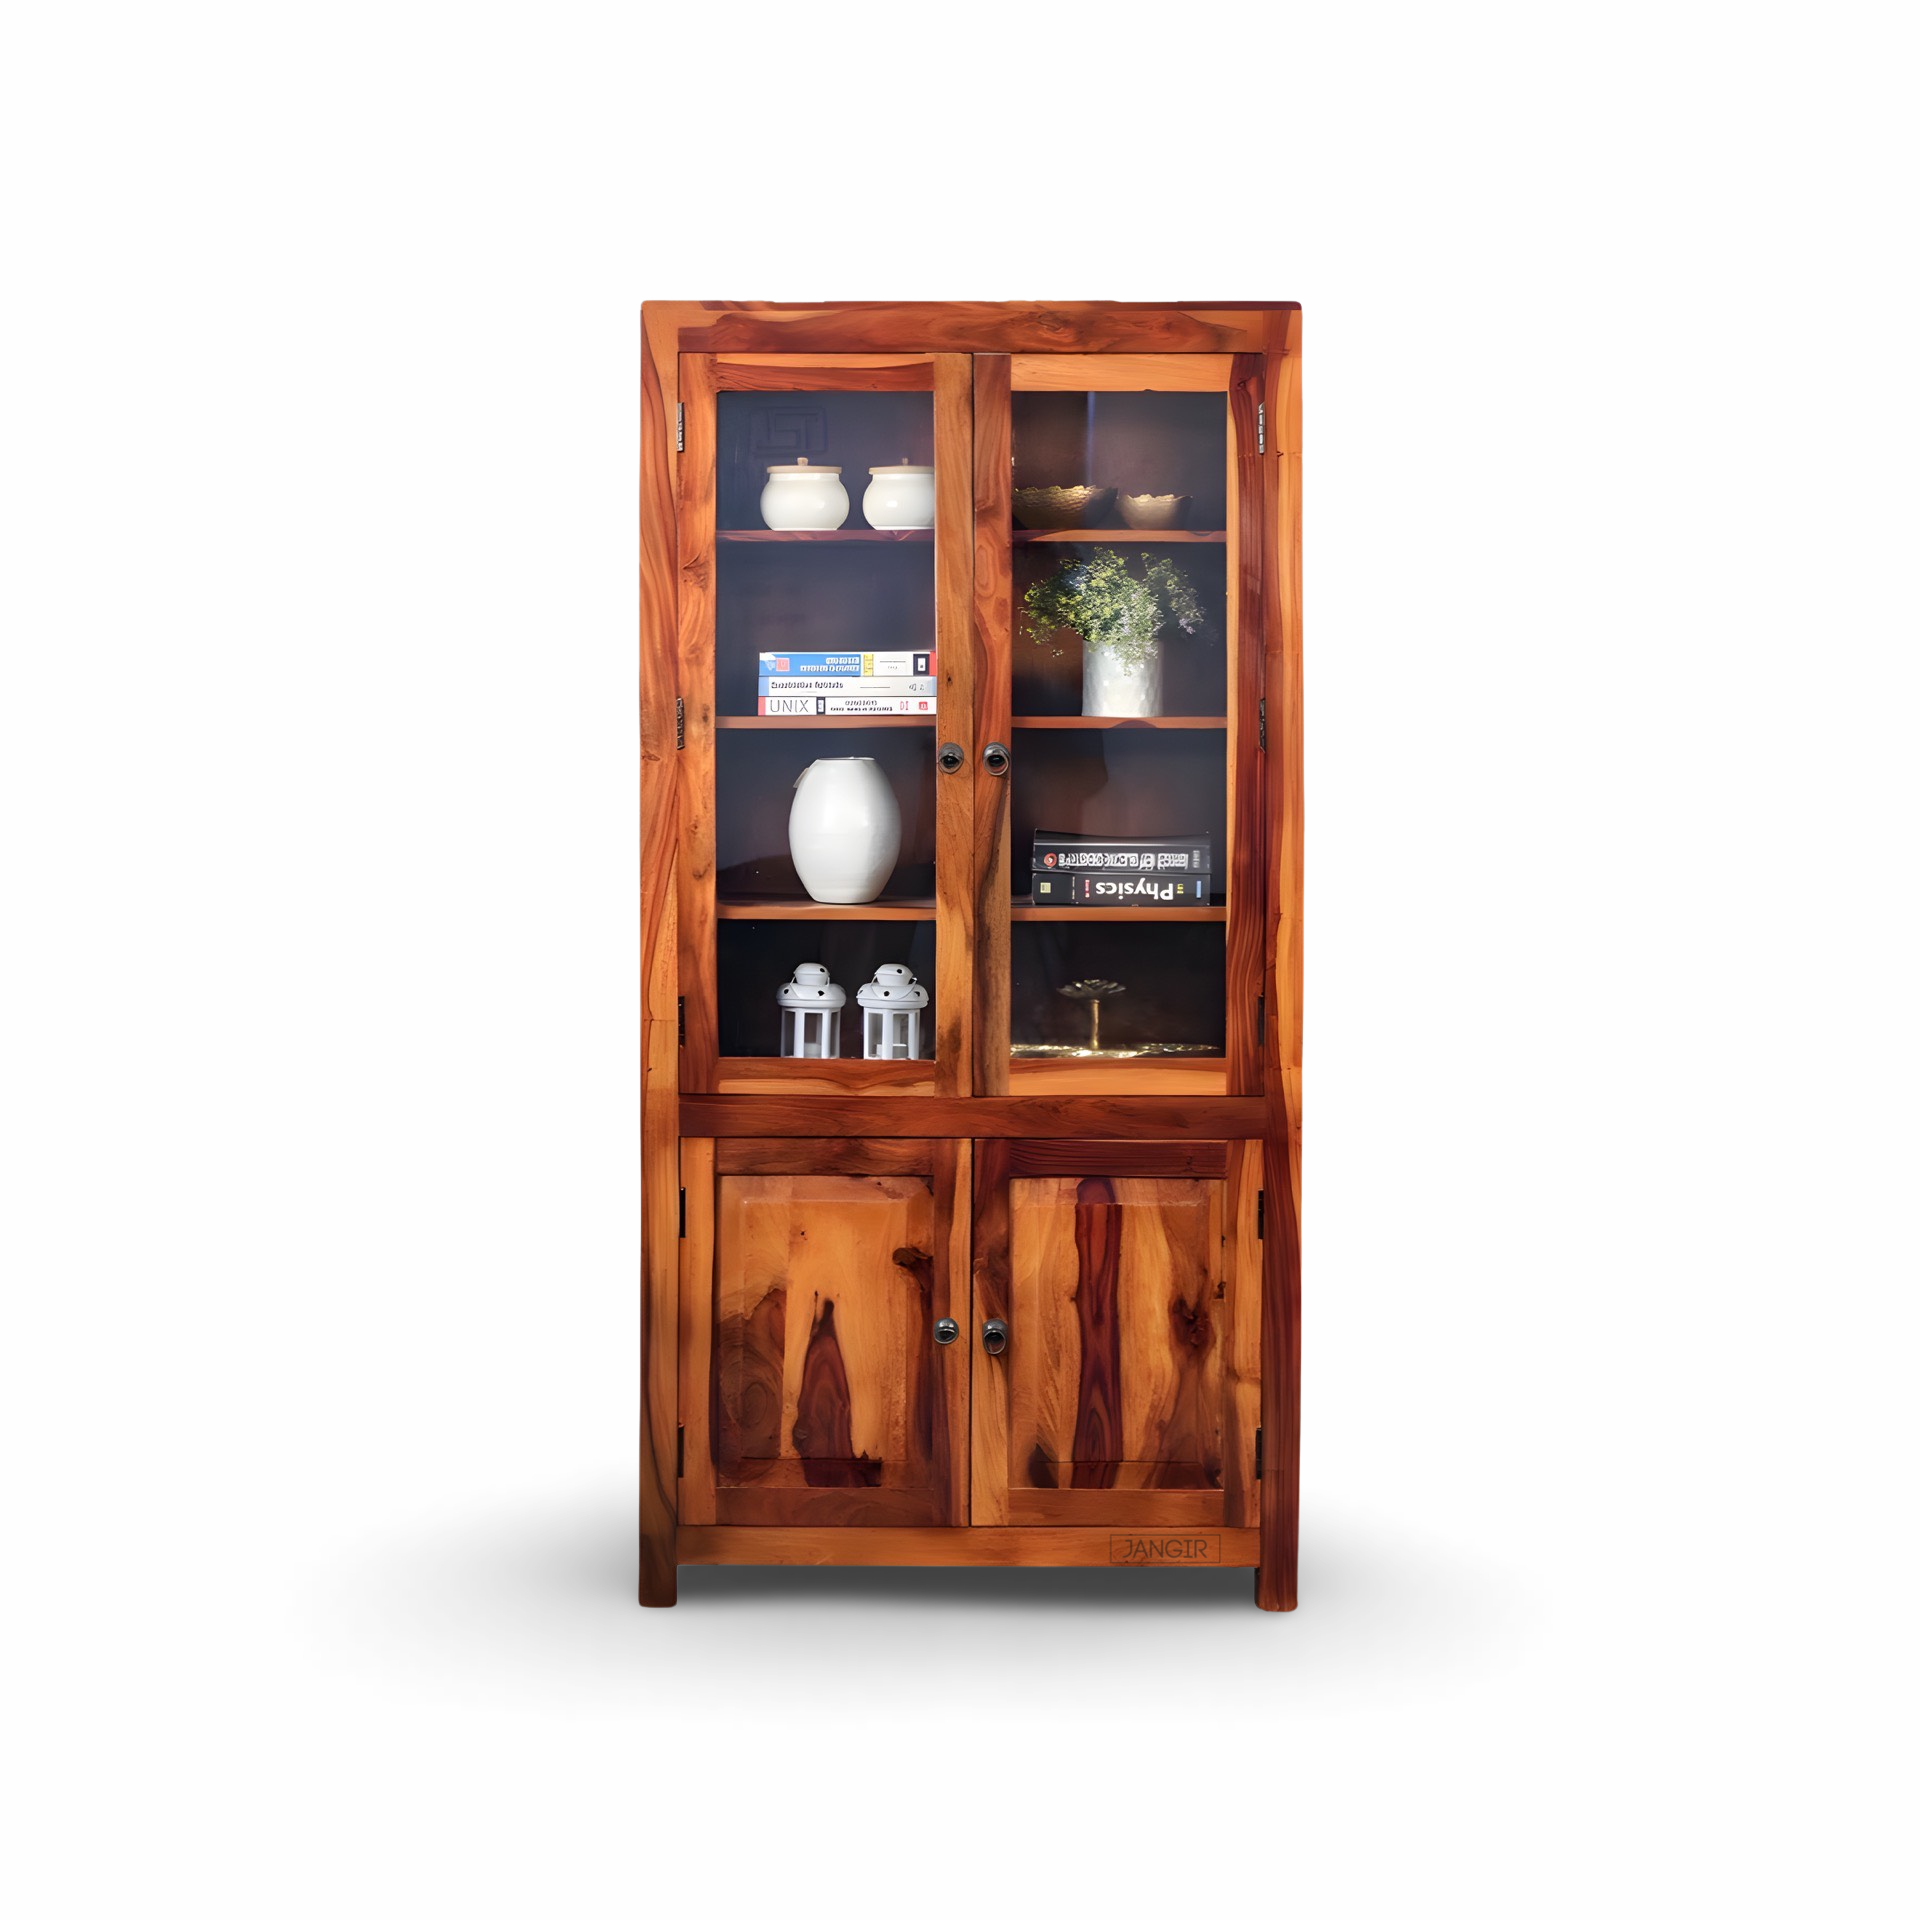 Organize your book collection effortlessly with our beautiful book rack featuring glass doors - a sturdy and stylish book rack made of premium sheesham wood, buy online or visit in-store at Bangalore!